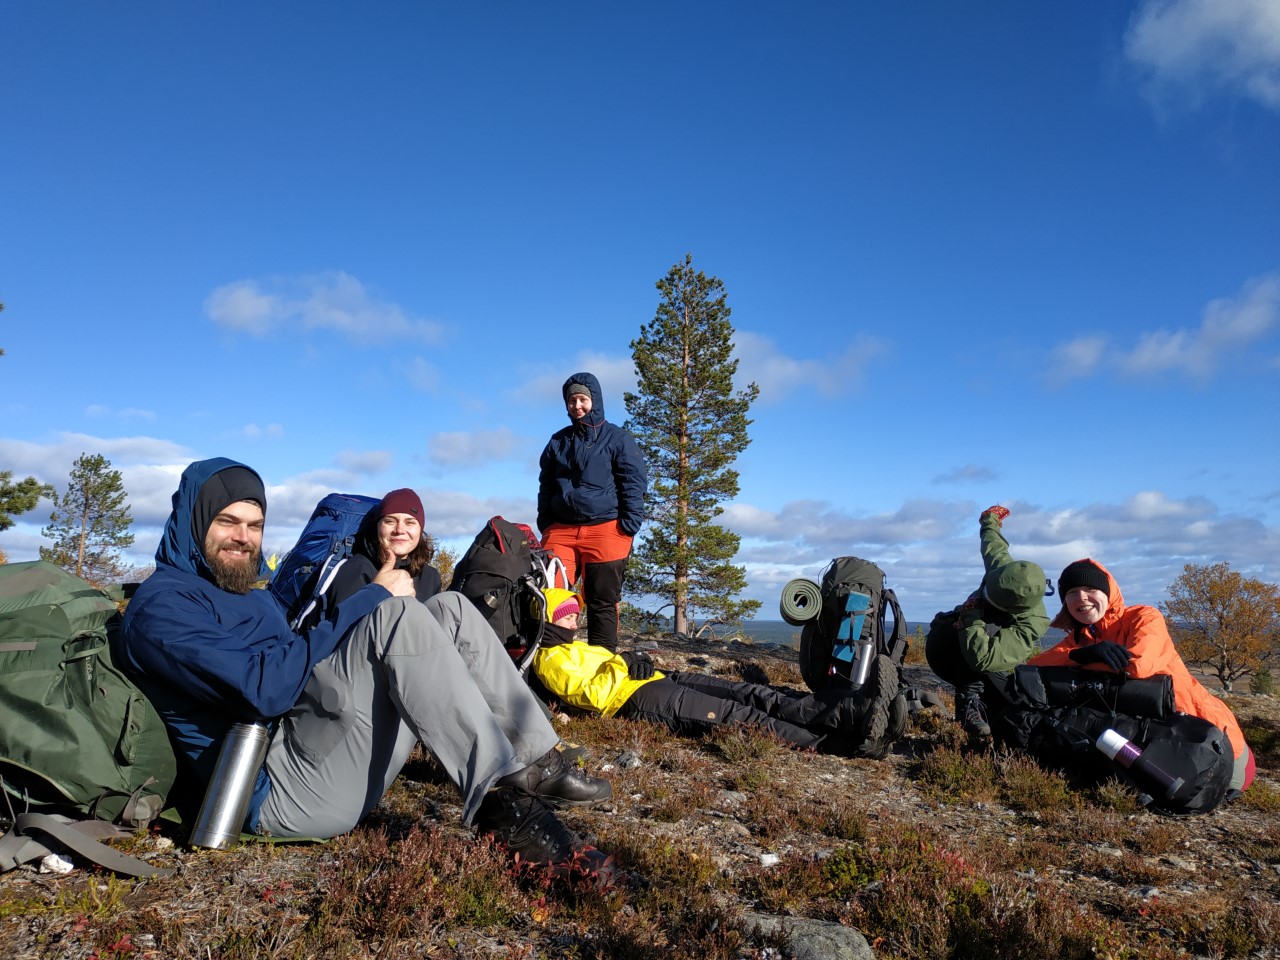 A group of hikers sitting together on a calm day